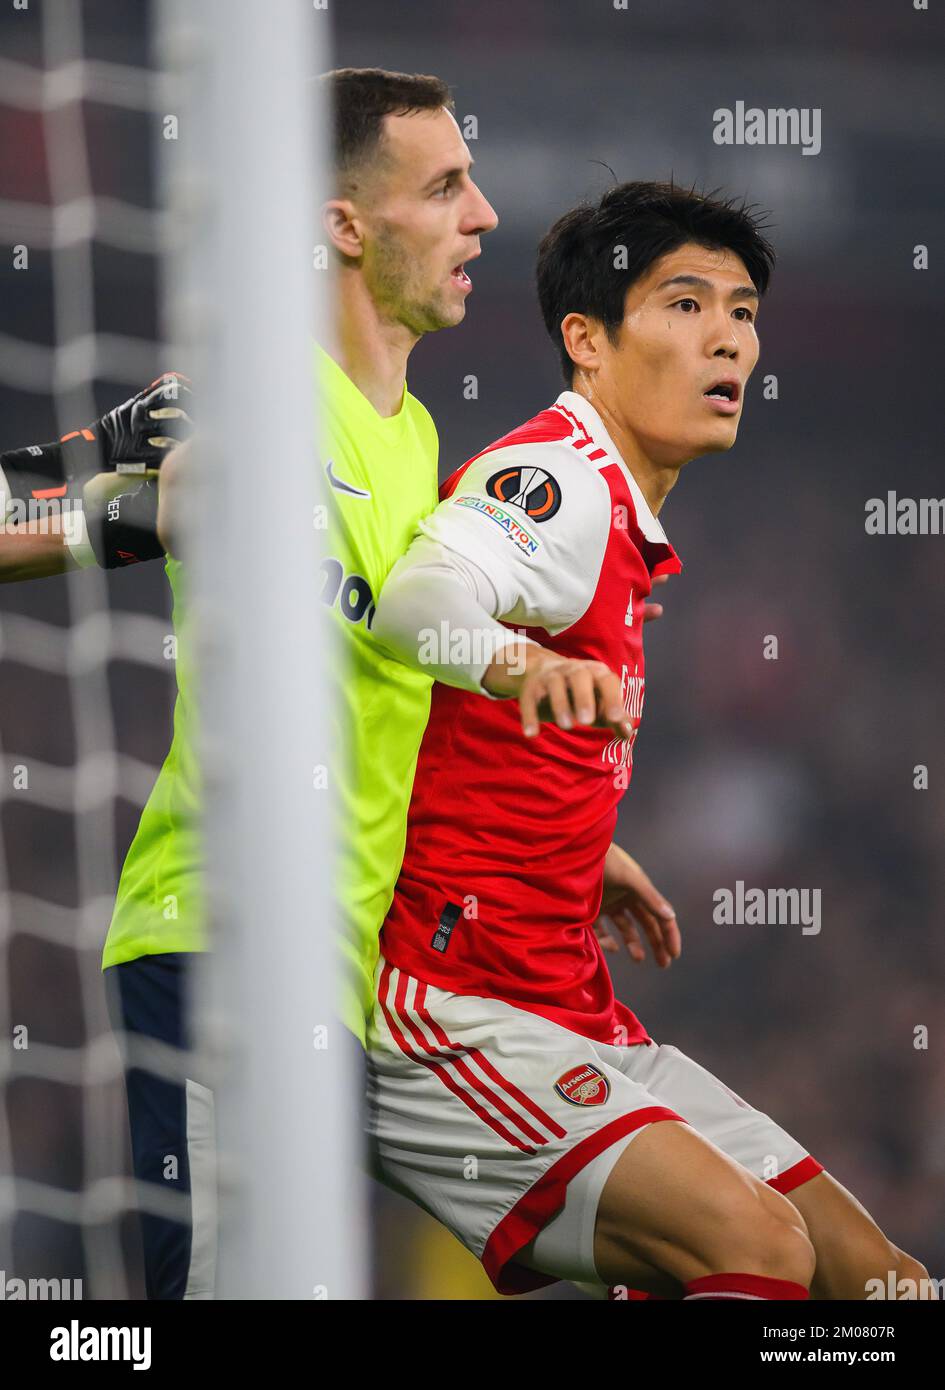 03 Nov 2022 - Arsenal v FC Zurich - UEFA Europa League - Group A - Emirates Stadium   Arsenal's Takehiro Tomiyasu during the match against FC Zurich Picture : Mark Pain / Alamy Stock Photo